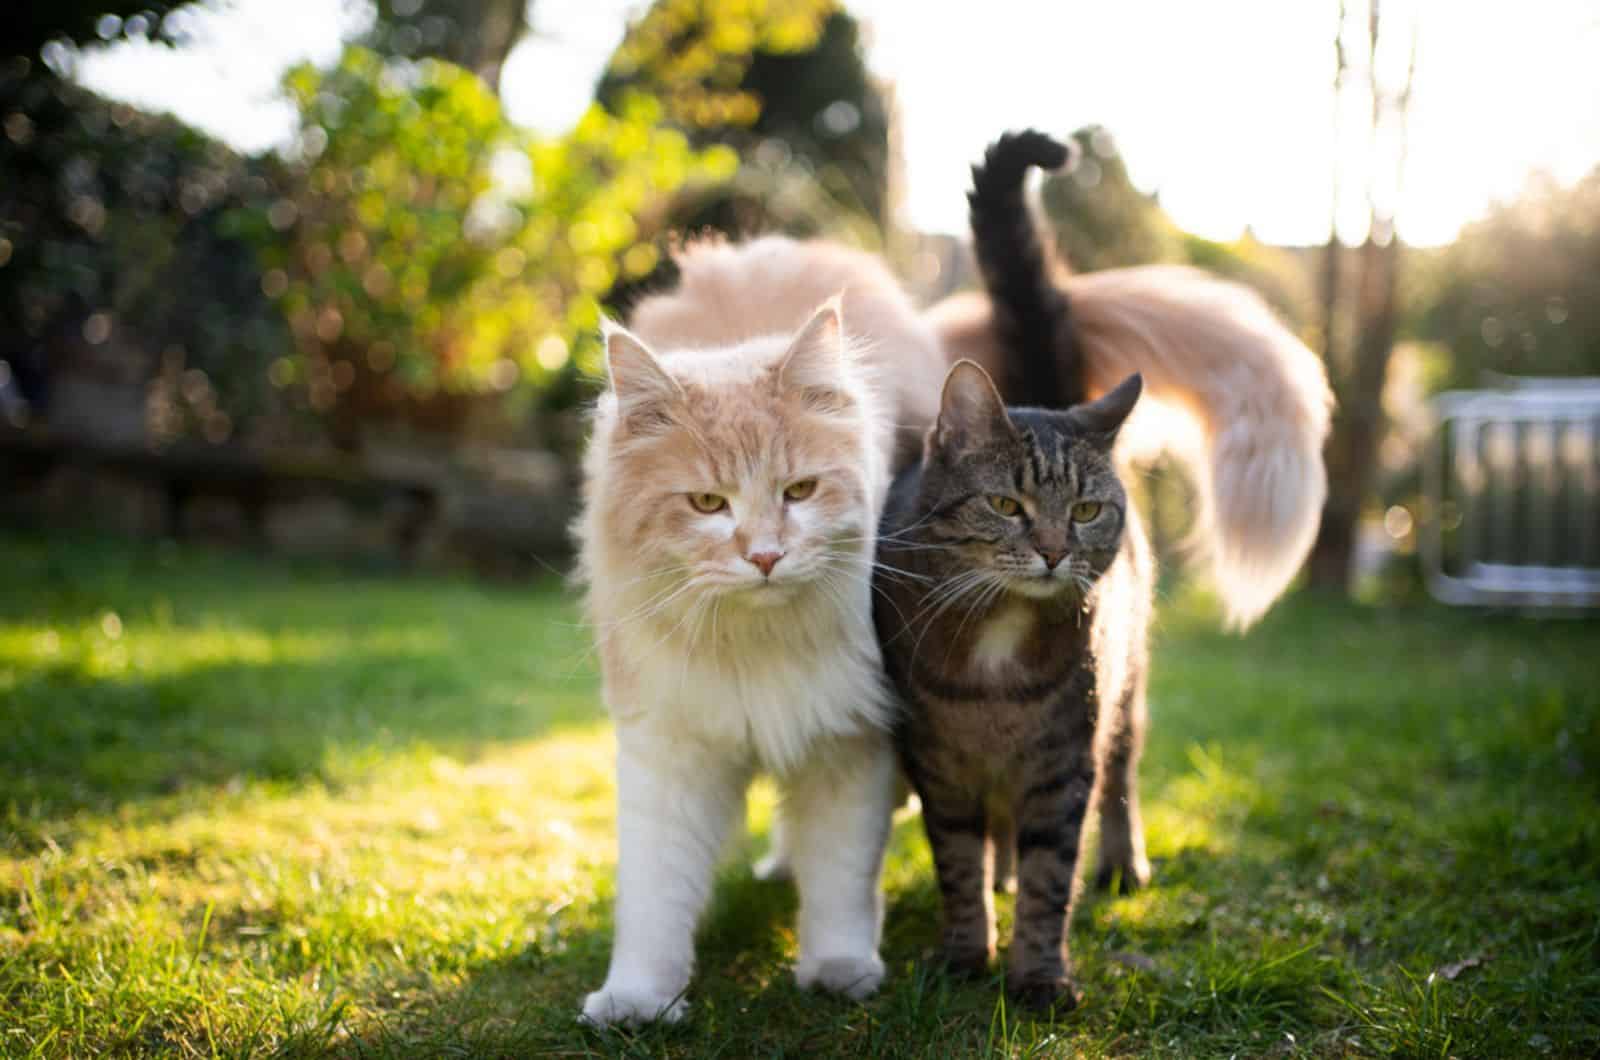 two different cats standing side by side outdoors